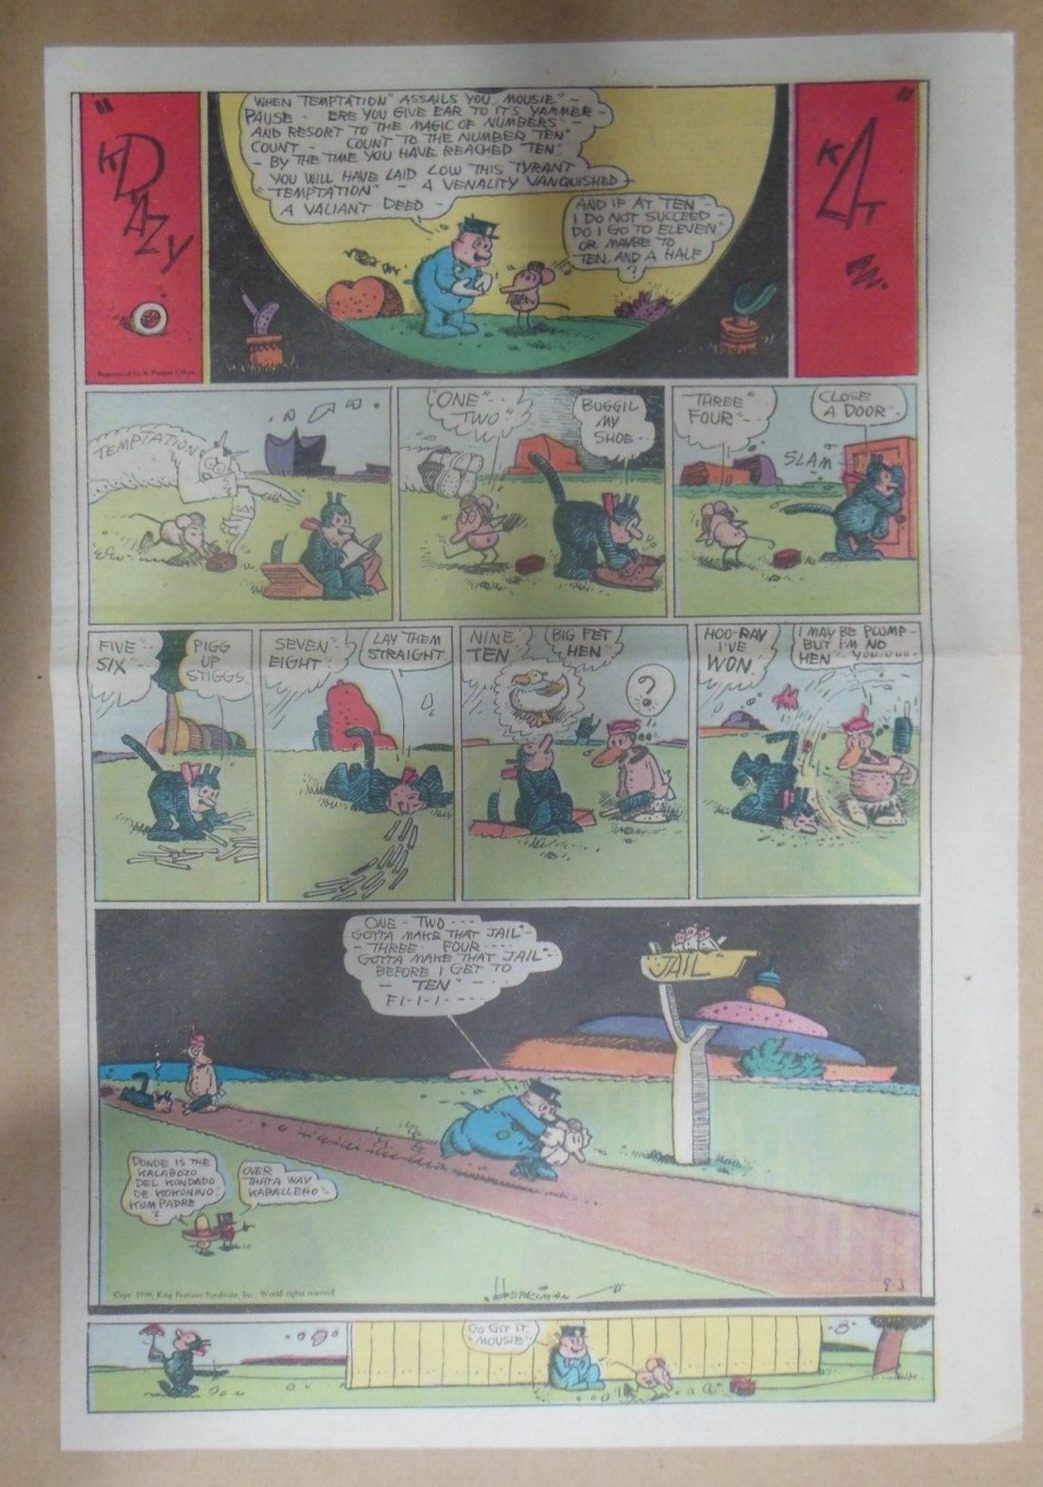 Krazy Kat Sunday Page by George Herriman from 9/3/1939 Size 11 x 15 inch Rare! Comic Books